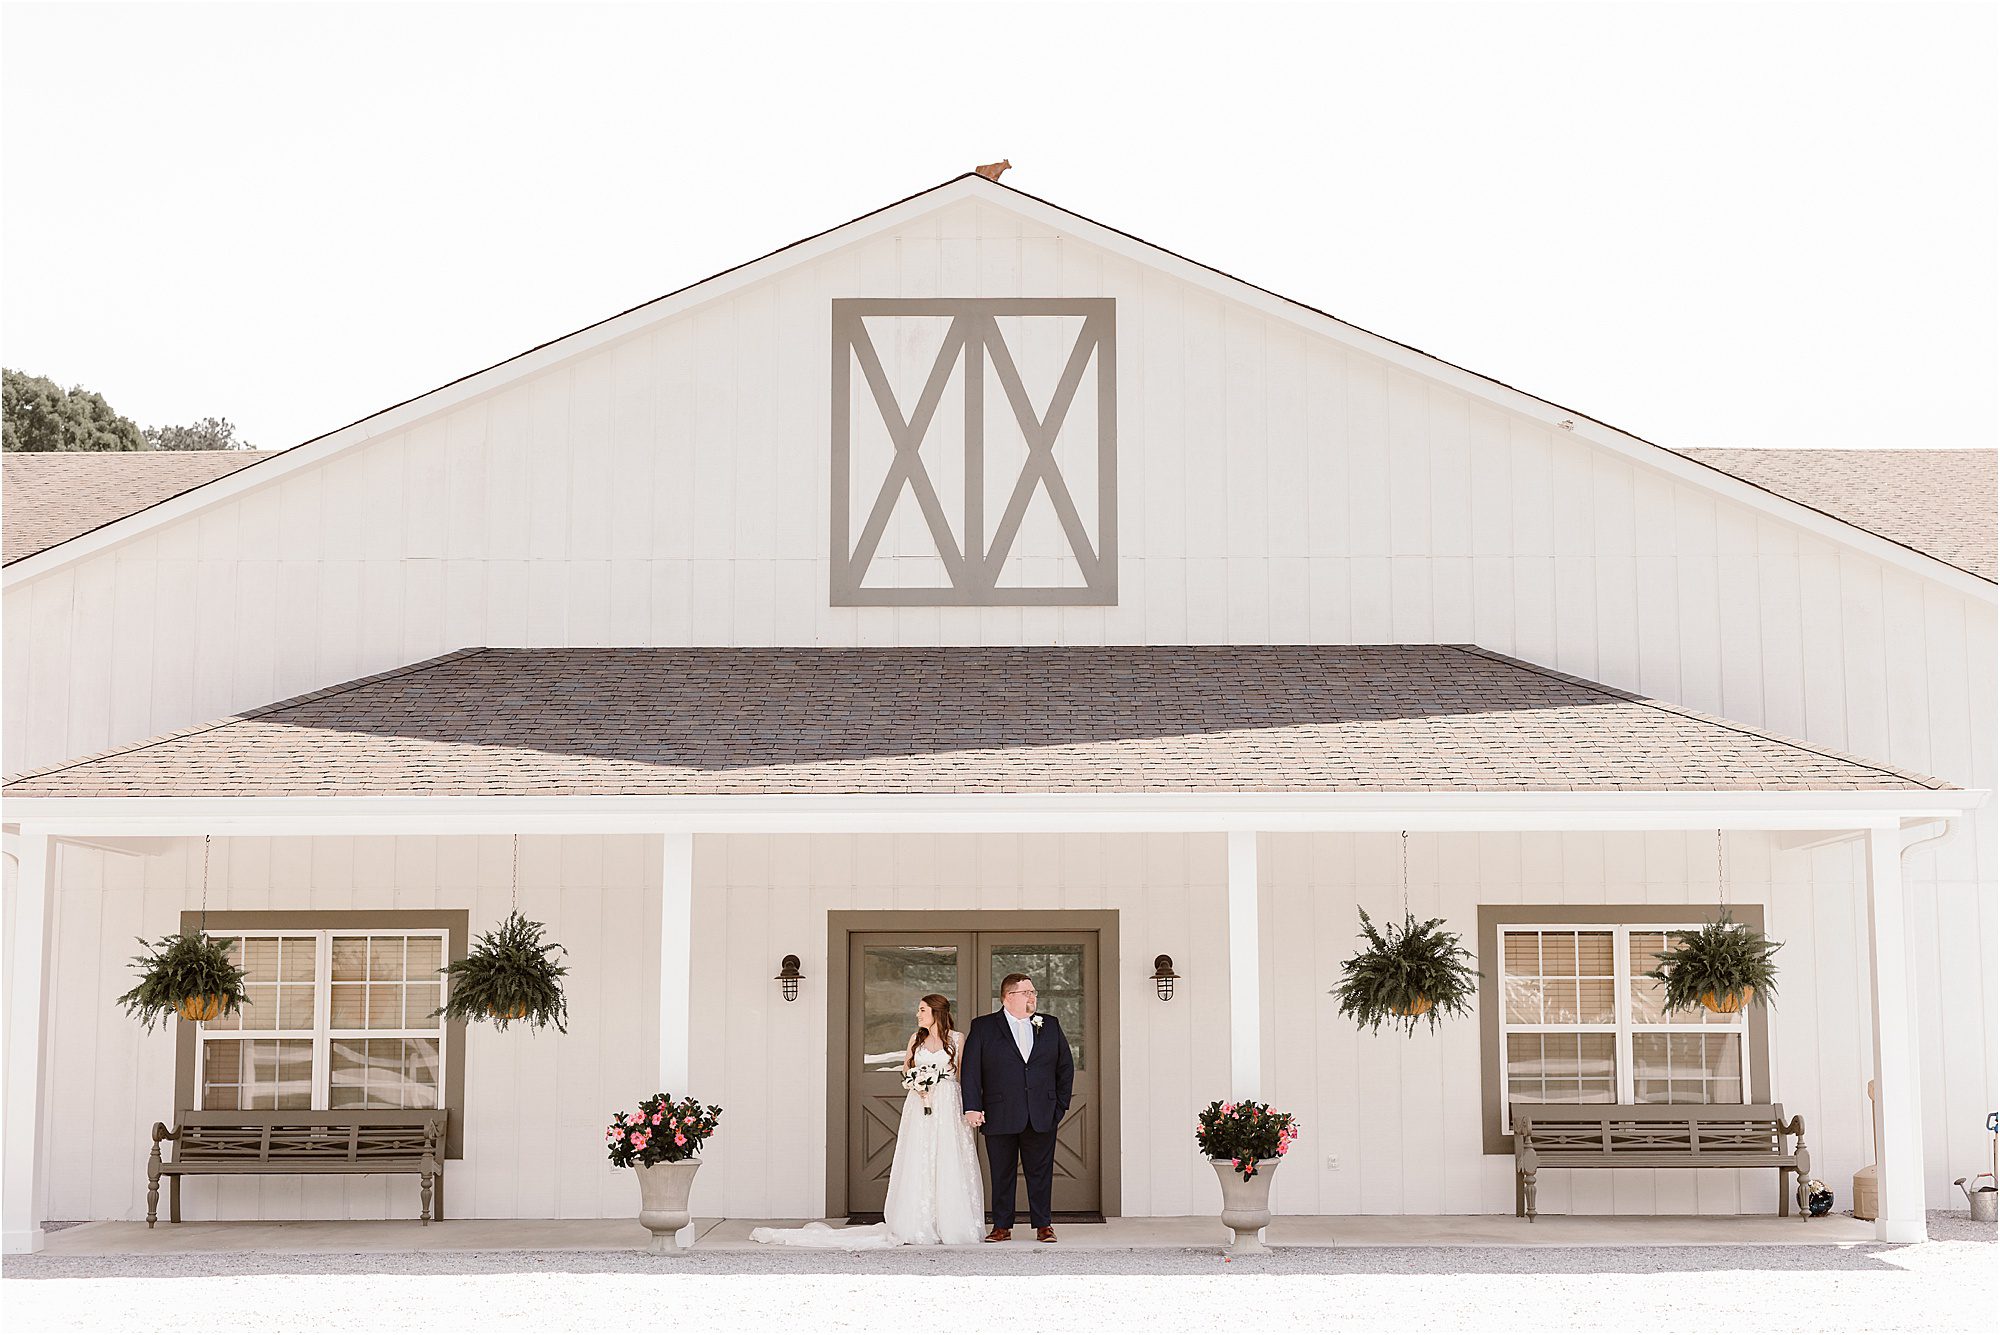 The Carriage House Wedding and Event Venue